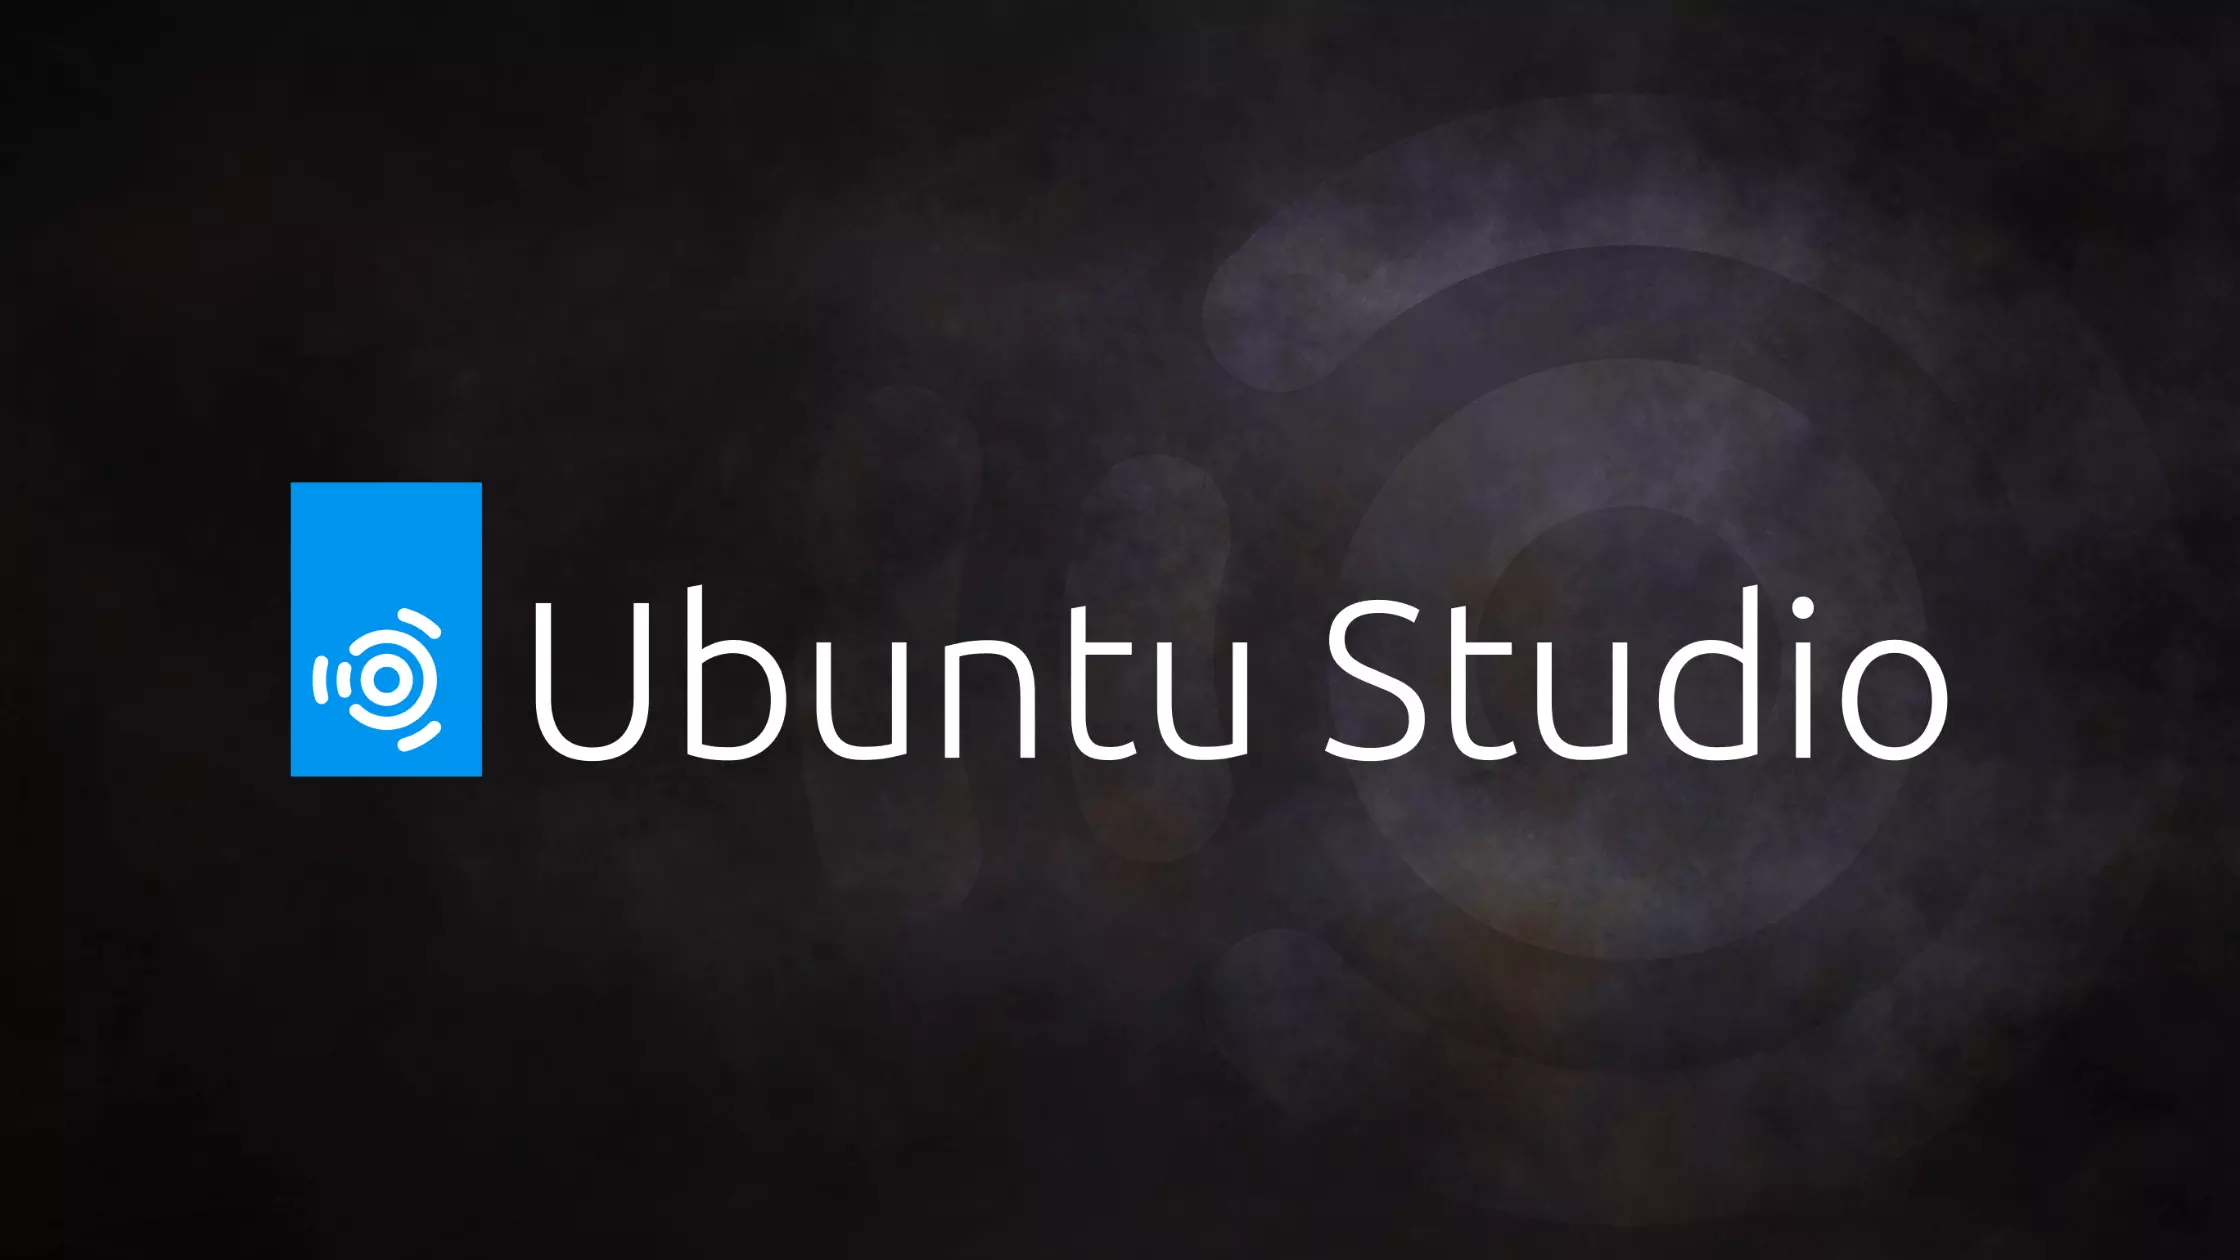 Ubuntu studio logo on the dark wallpaper which is black with a mottled grey image of the ubuntu studio logo on the right side - a circle with several concentric circles outside it.